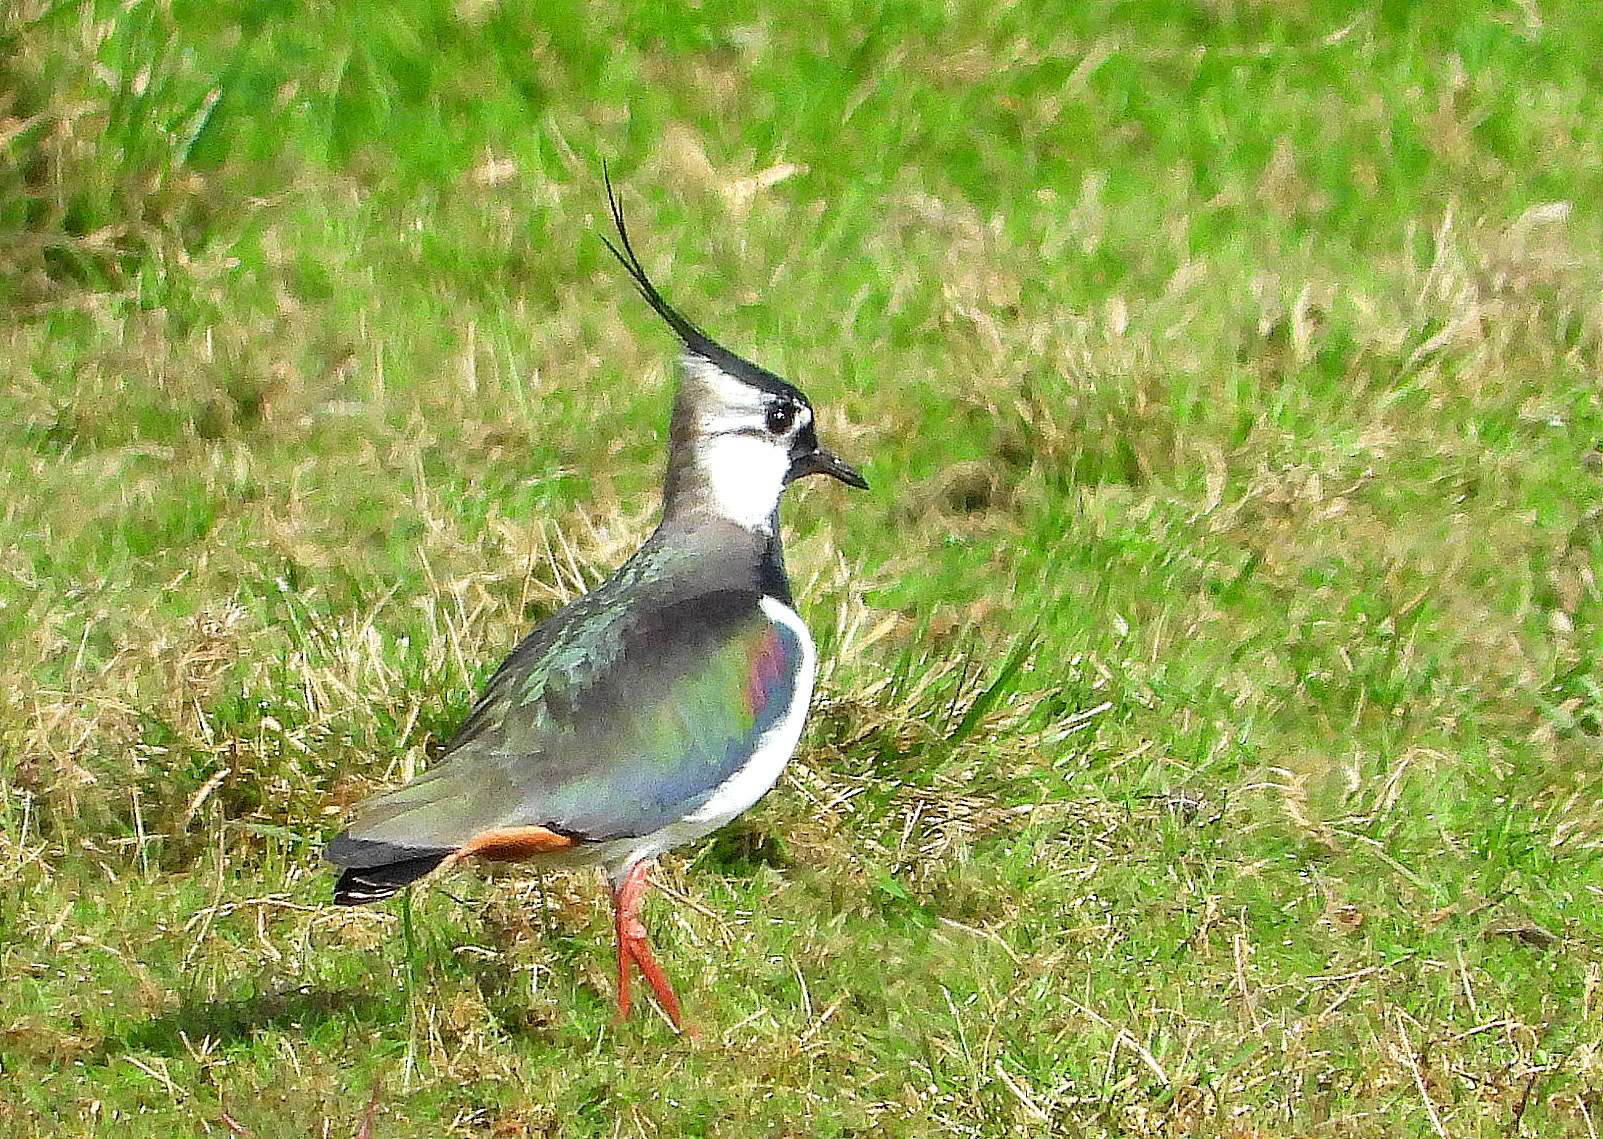 Lapwing by Kenneth Bradley at Exminster marshes RSPB